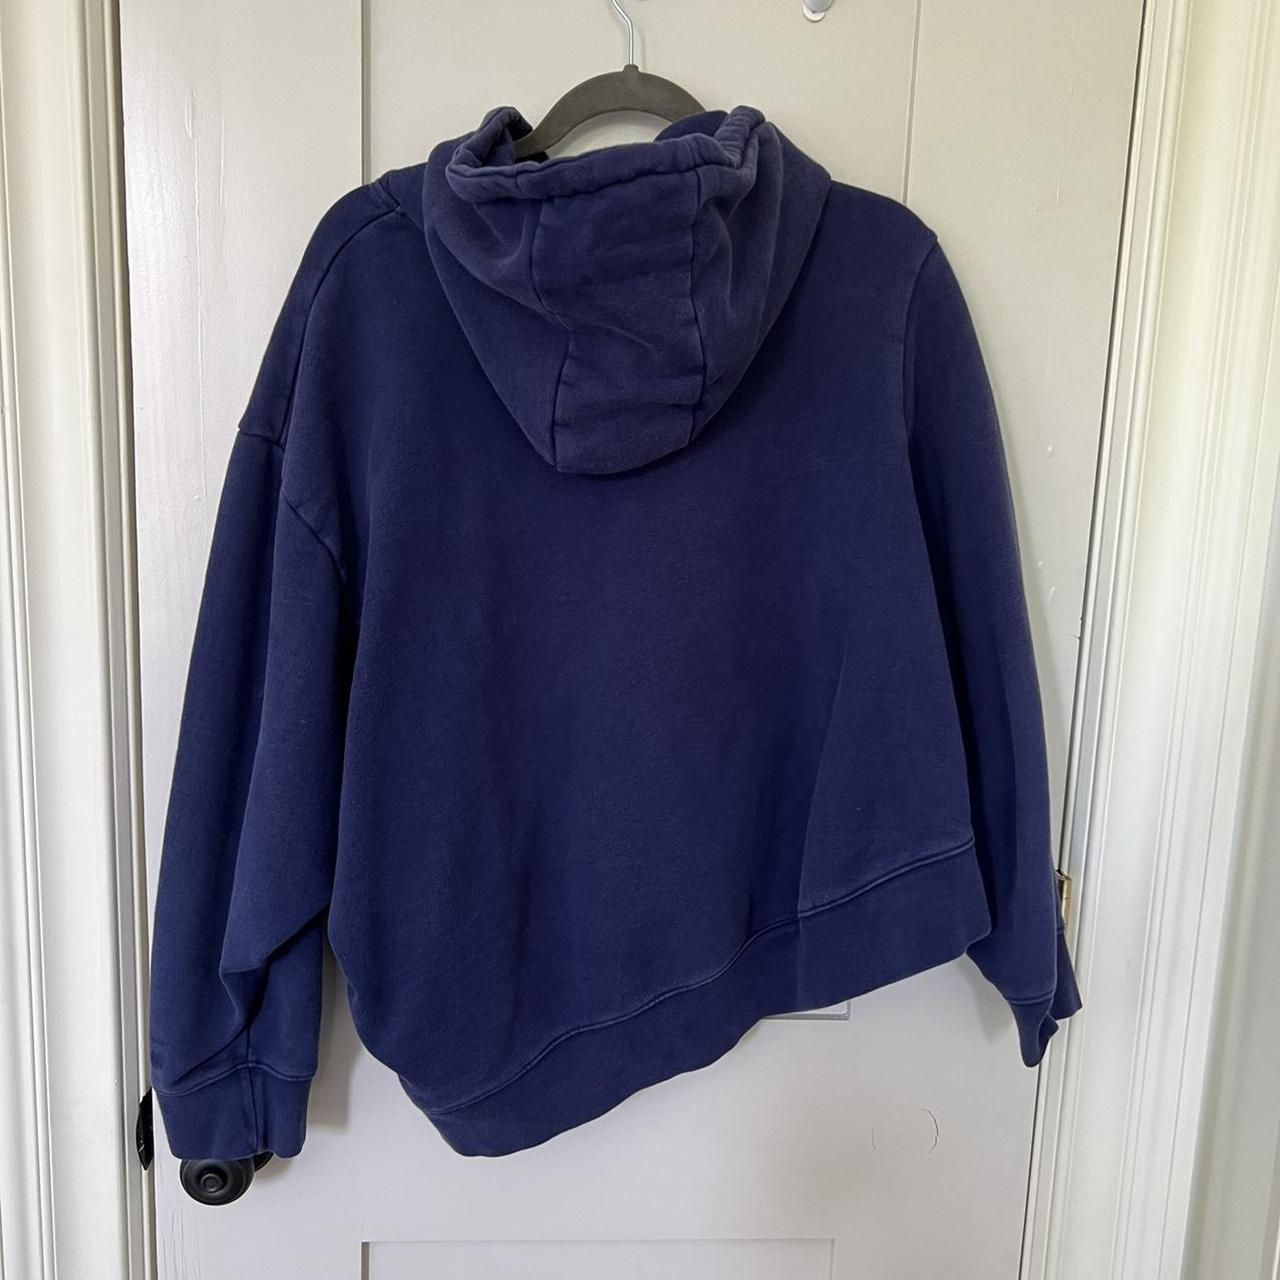 Product Image 2 - Martine Rose Navy Asymmetrical Hoodie

In